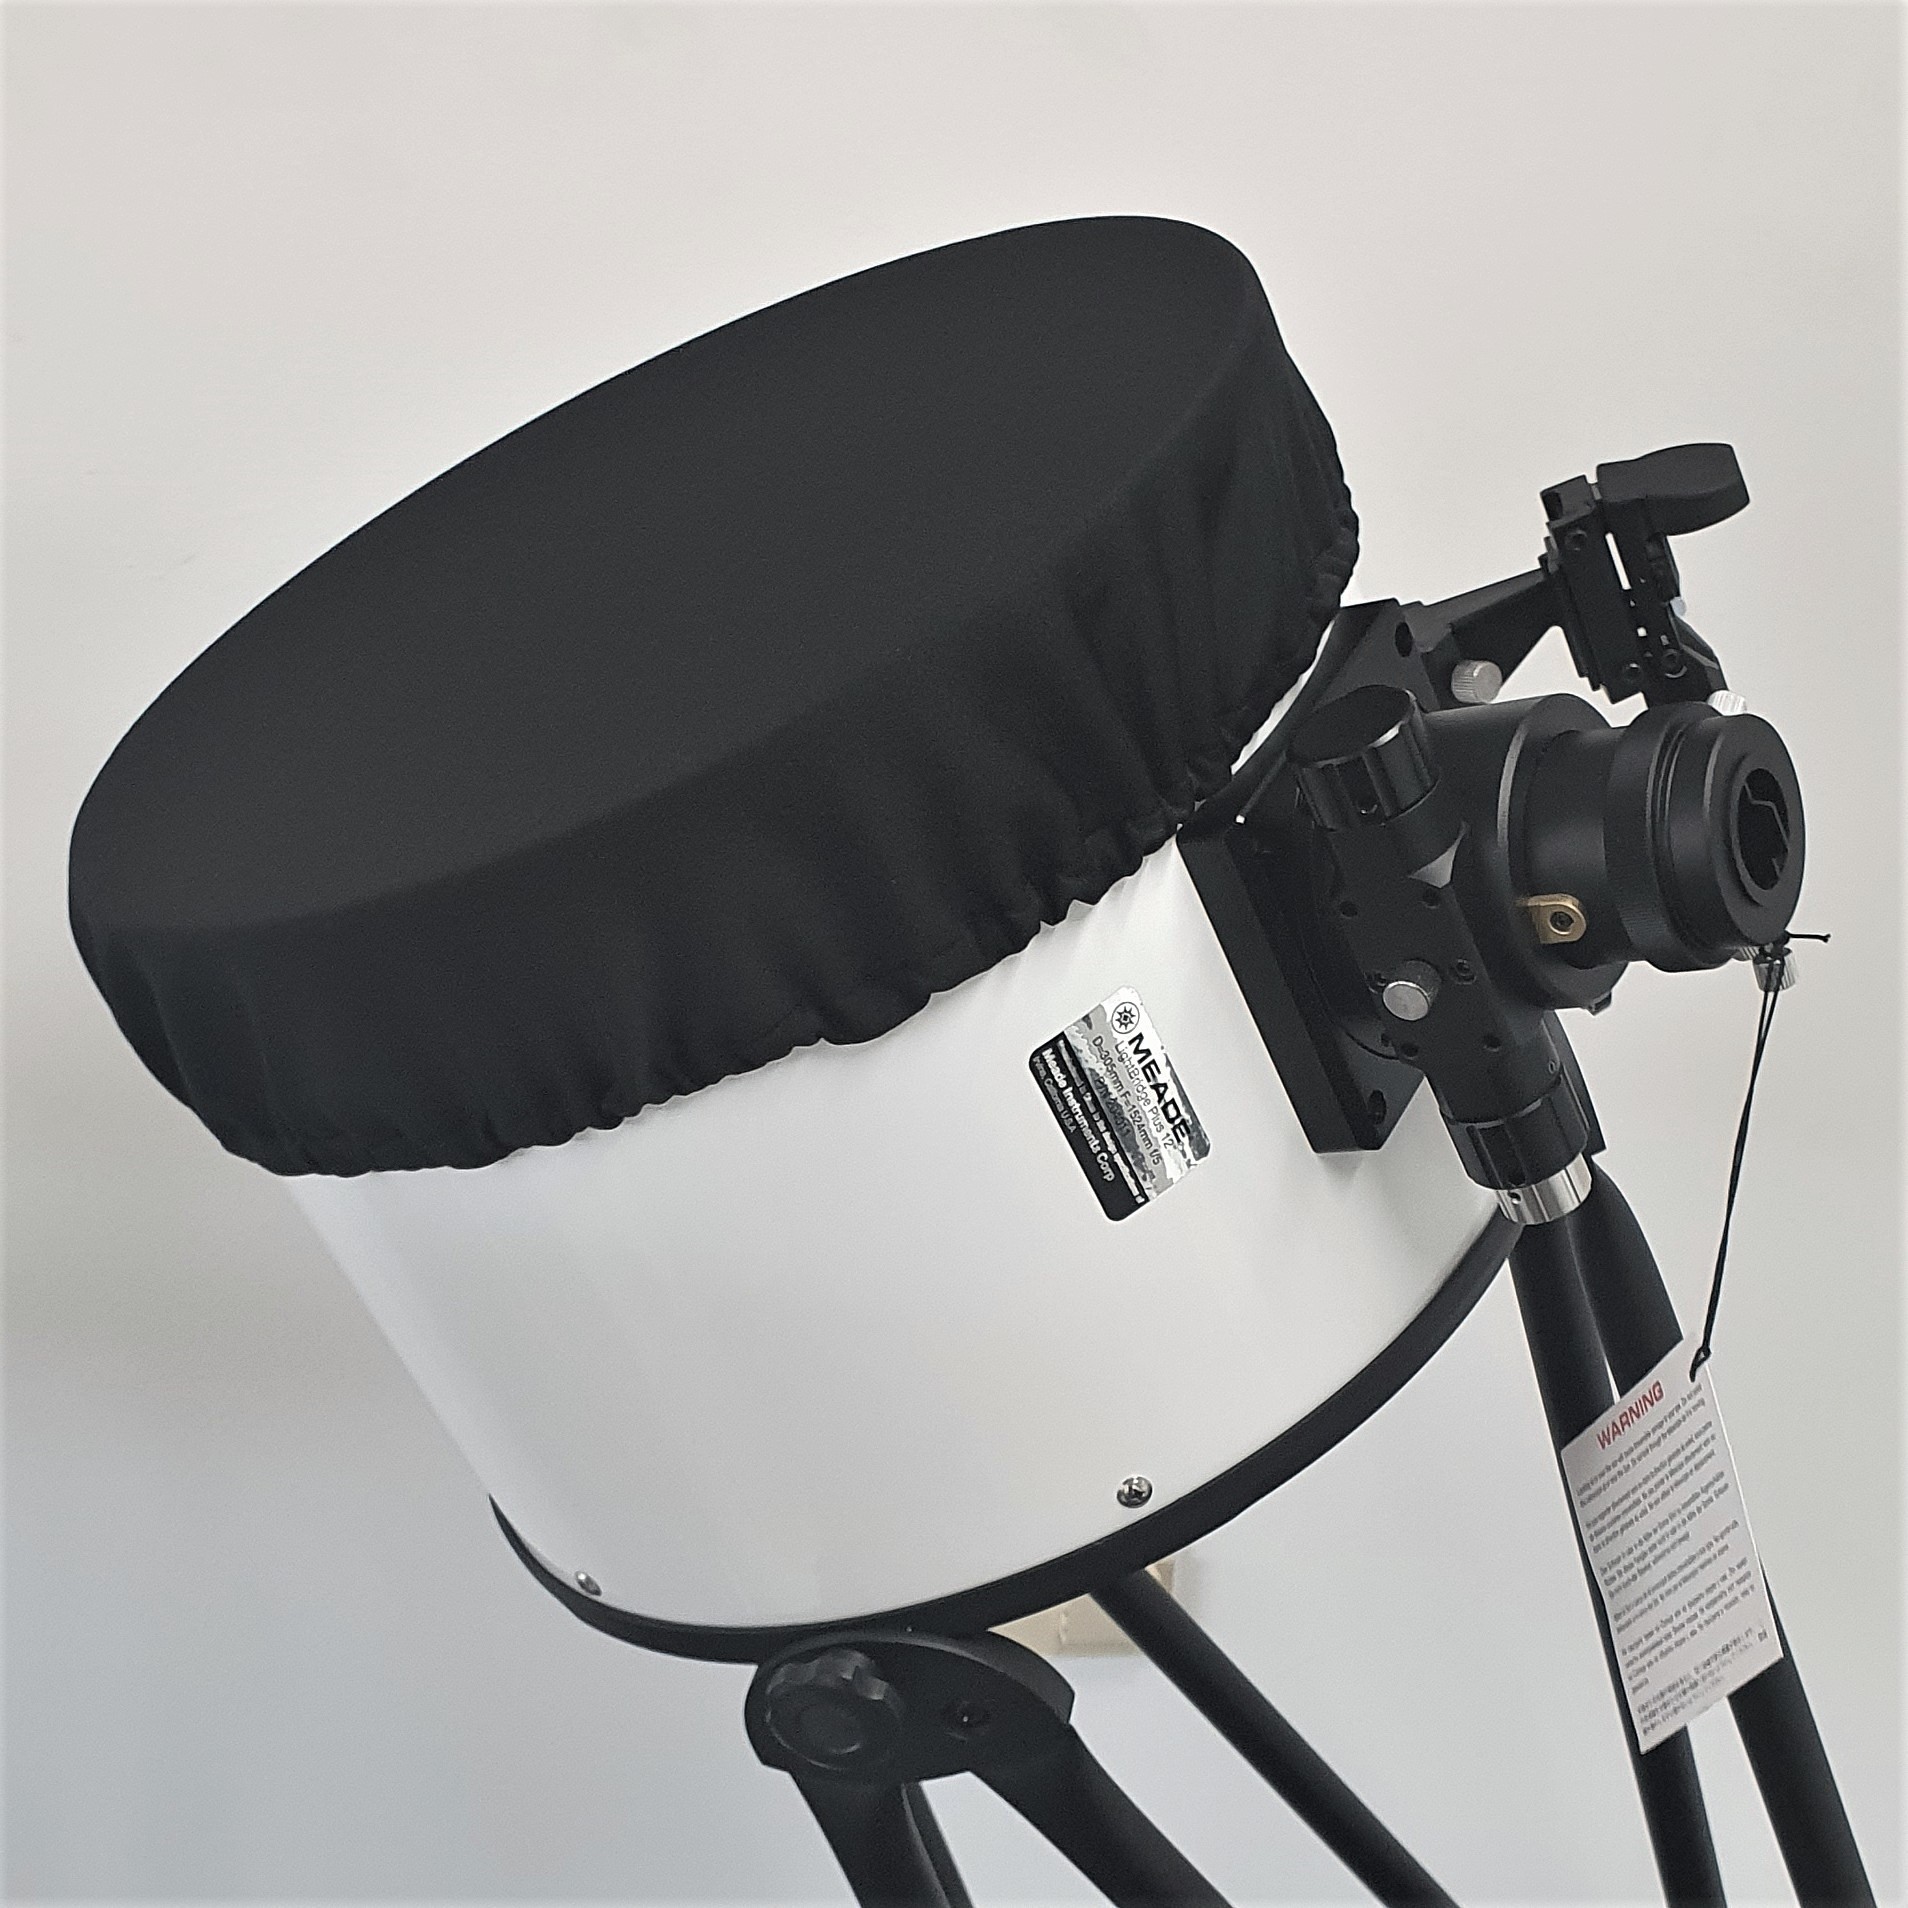 Pegasus Dust Cover for 12 inch Dobsonian - Made in Australia